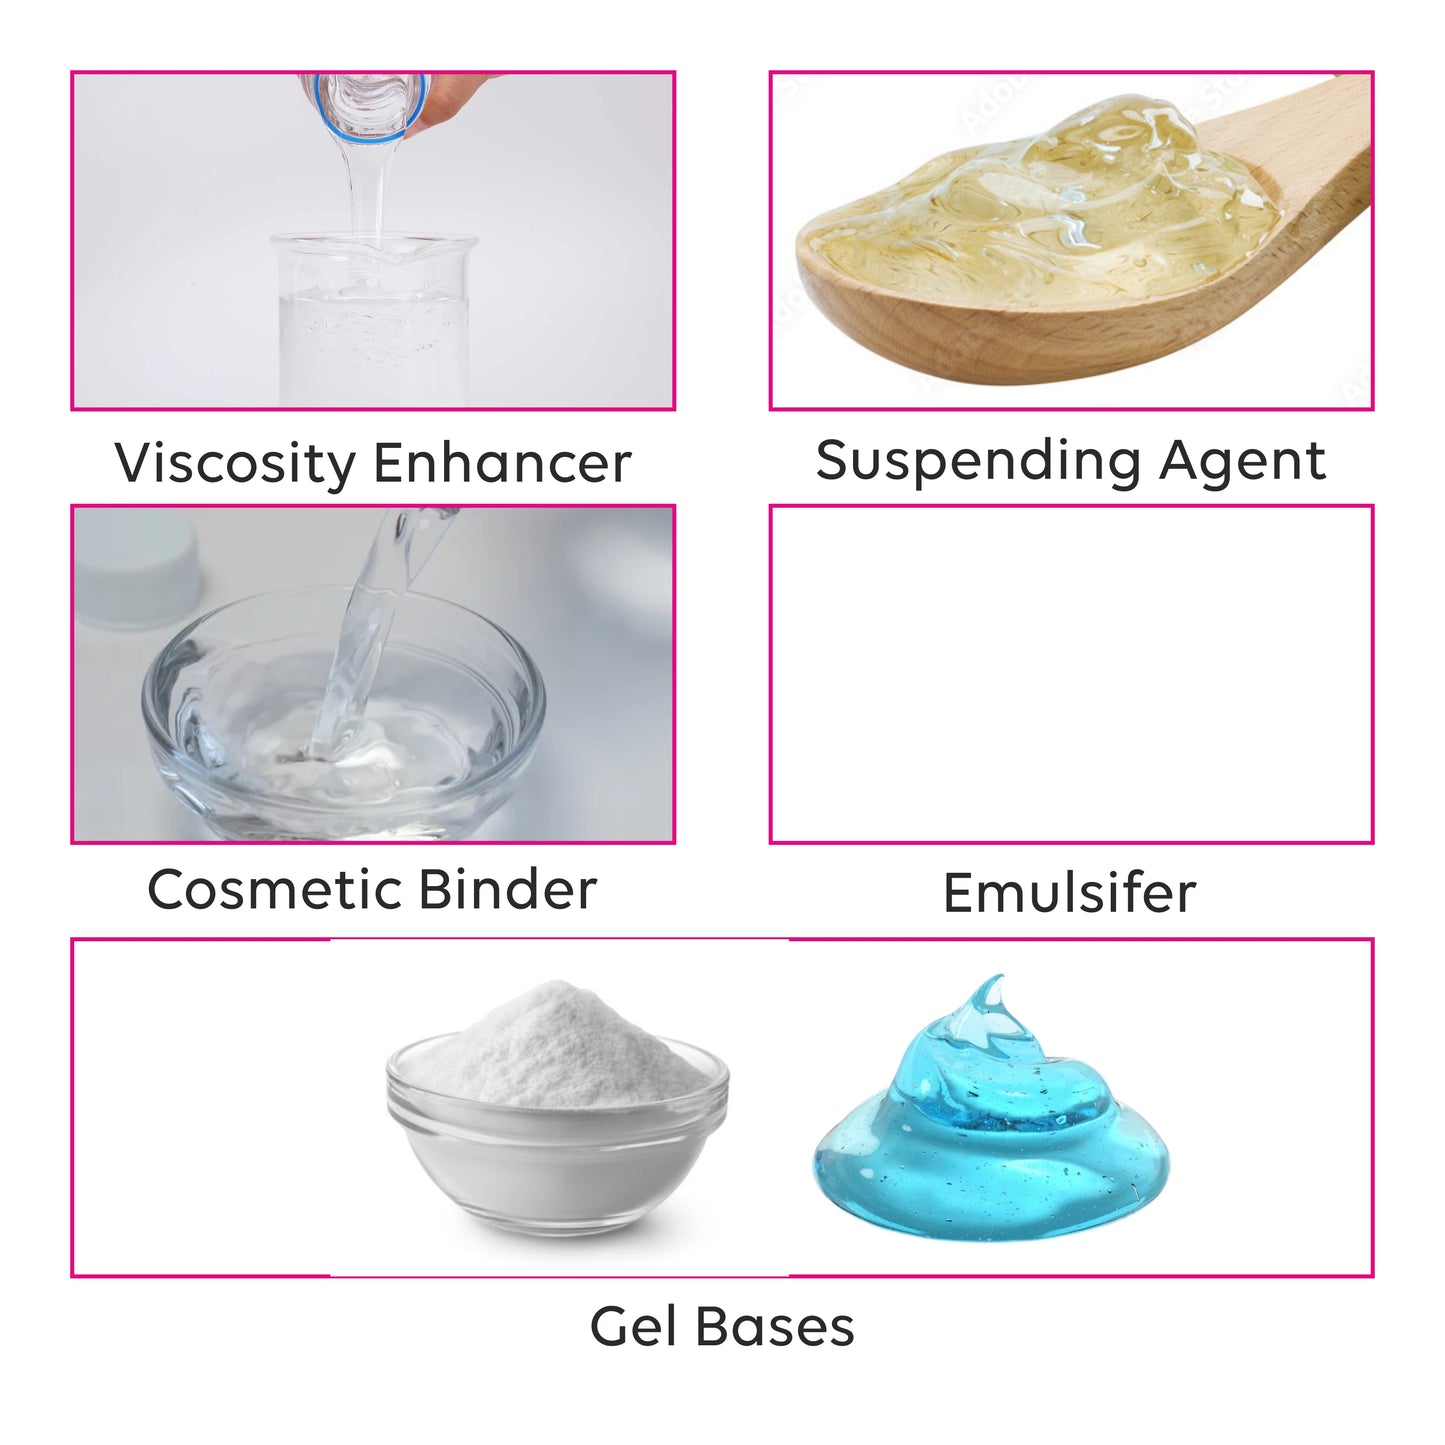 cosmeticmaking, saopmaking, cosmeticmakingingredients, soapmakingingredients,cosmeticingredients,naturalingredients,organicingredients,veganingredients, essentialoils,fragranceoils,carrieroils, carrieroils, butters, clays,botanicals,herbs,preservatives,emulsifiers,surfa ctants,thickeners, thickeners,exfoliants,carbomer